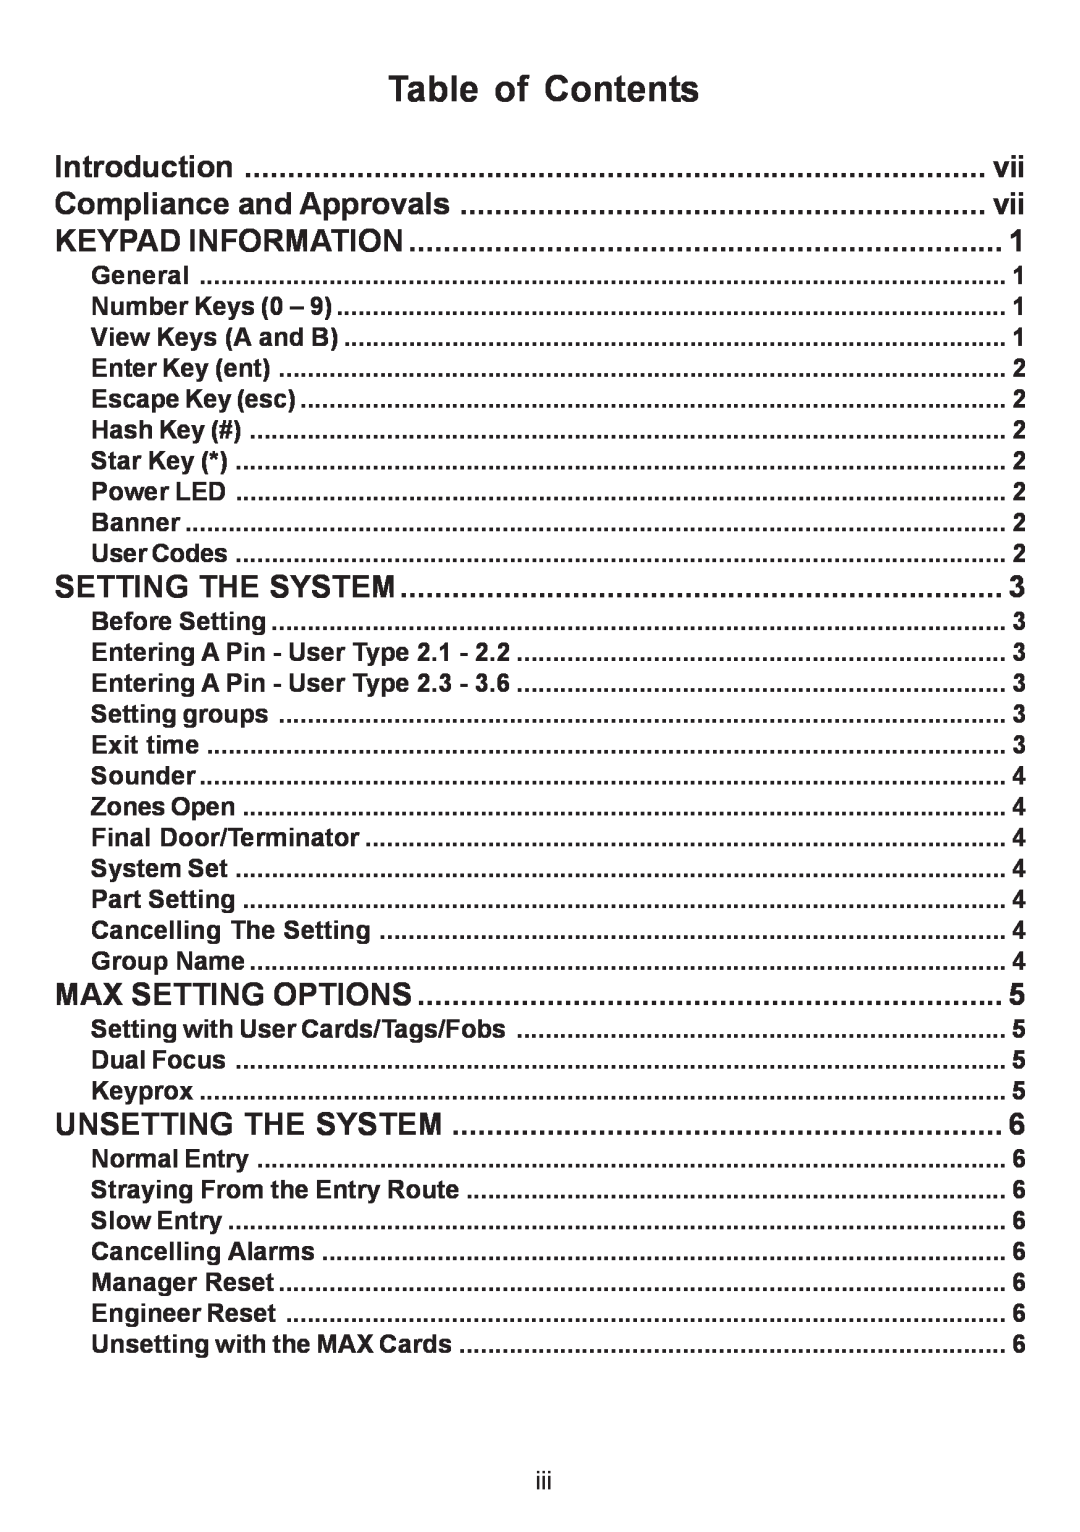 Honeywell 3-144C, 3-520C Table of Contents, Introduction, Compliance and Approvals, Keypad Information, Setting The System 